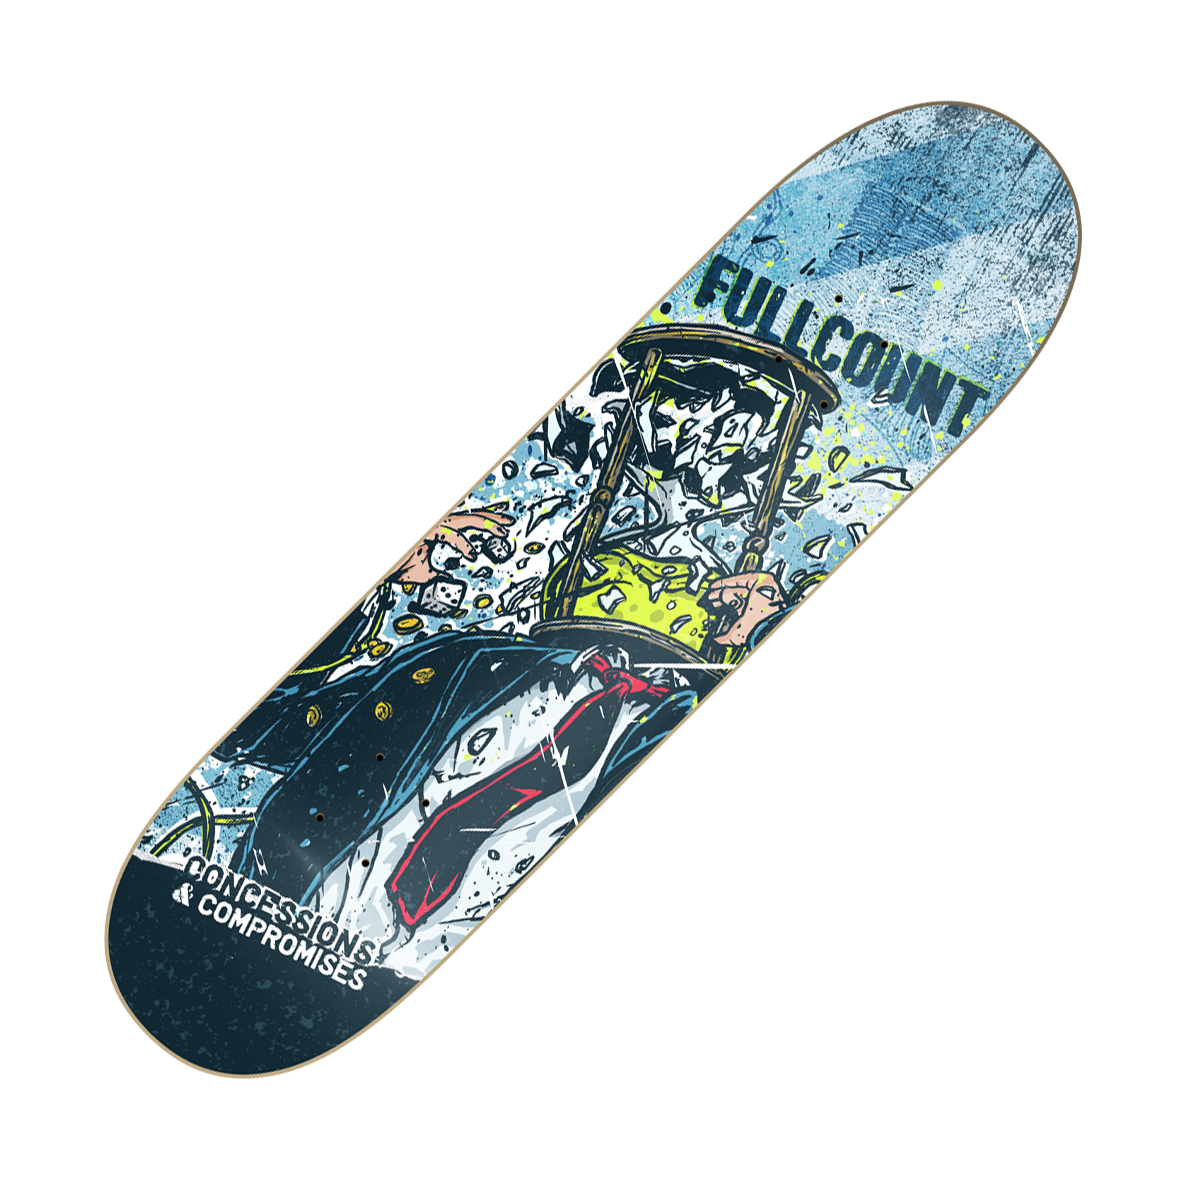 FULLCOUNT - "Concessions & Compromises" (Skateboard Deck)